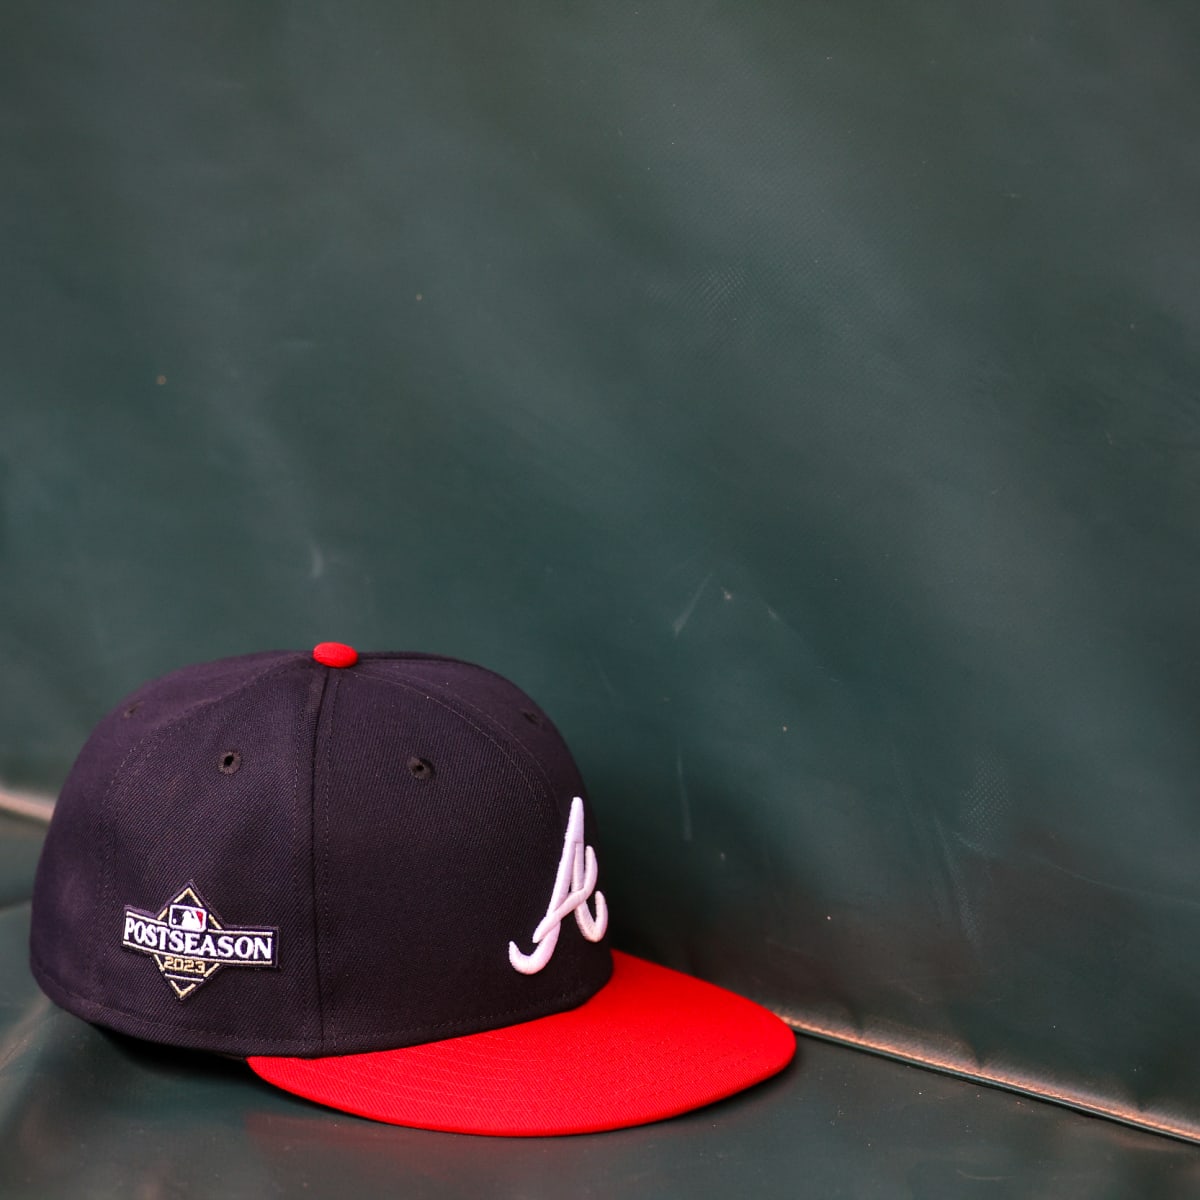 Atlanta Braves announce 26-man roster for NLDS - Sports Illustrated Atlanta  Braves News, Analysis and More